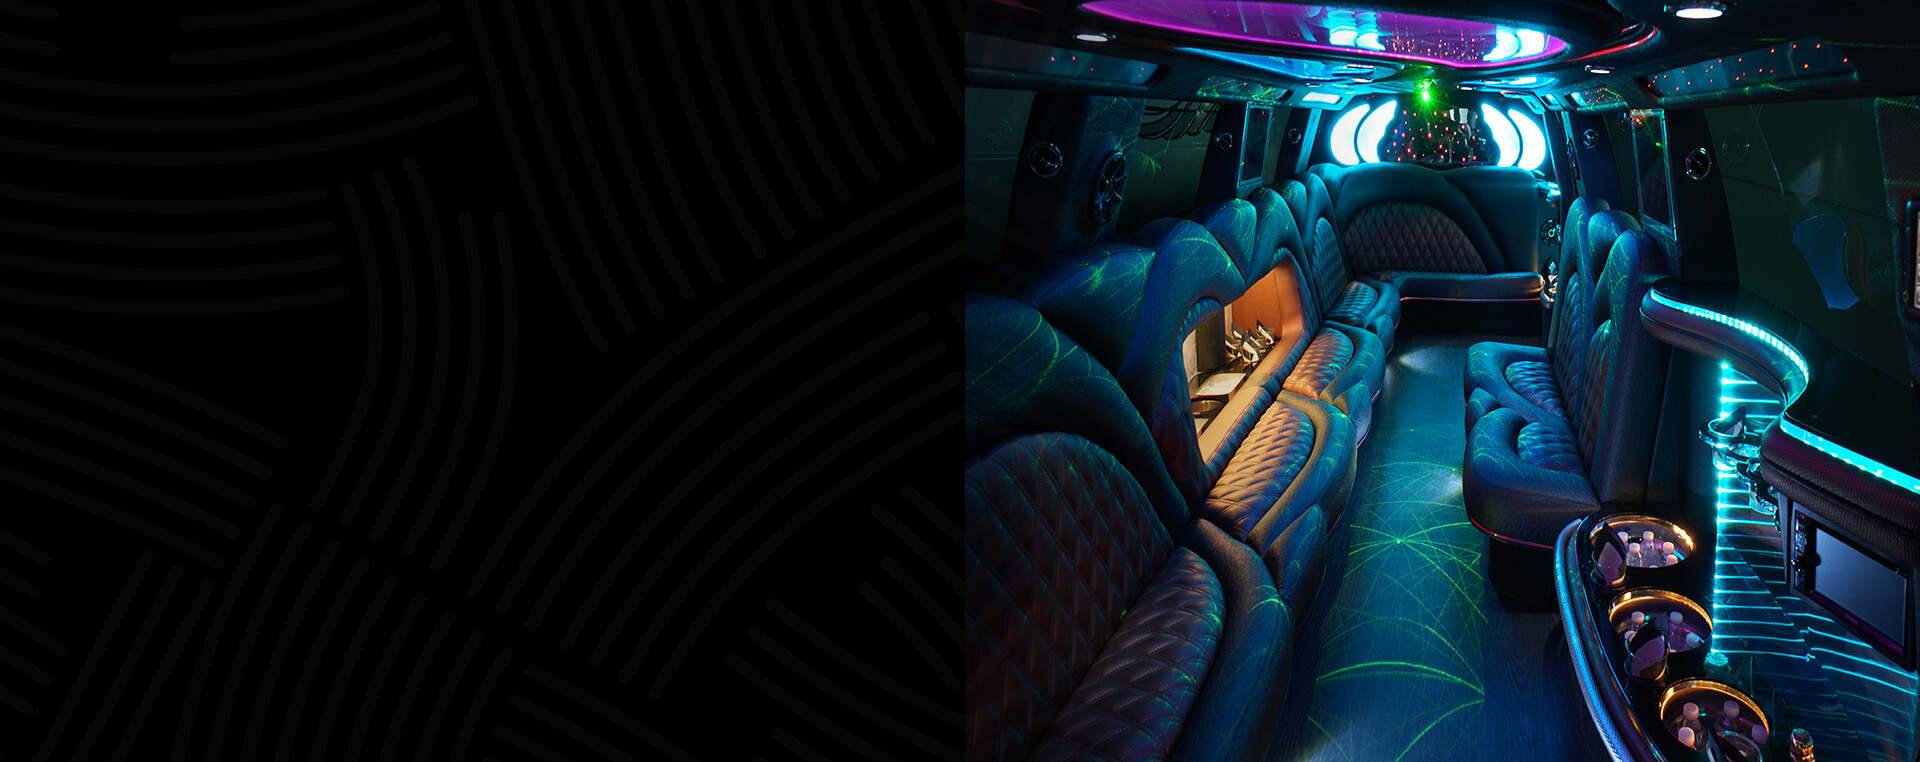 Comfortable seating in a limo